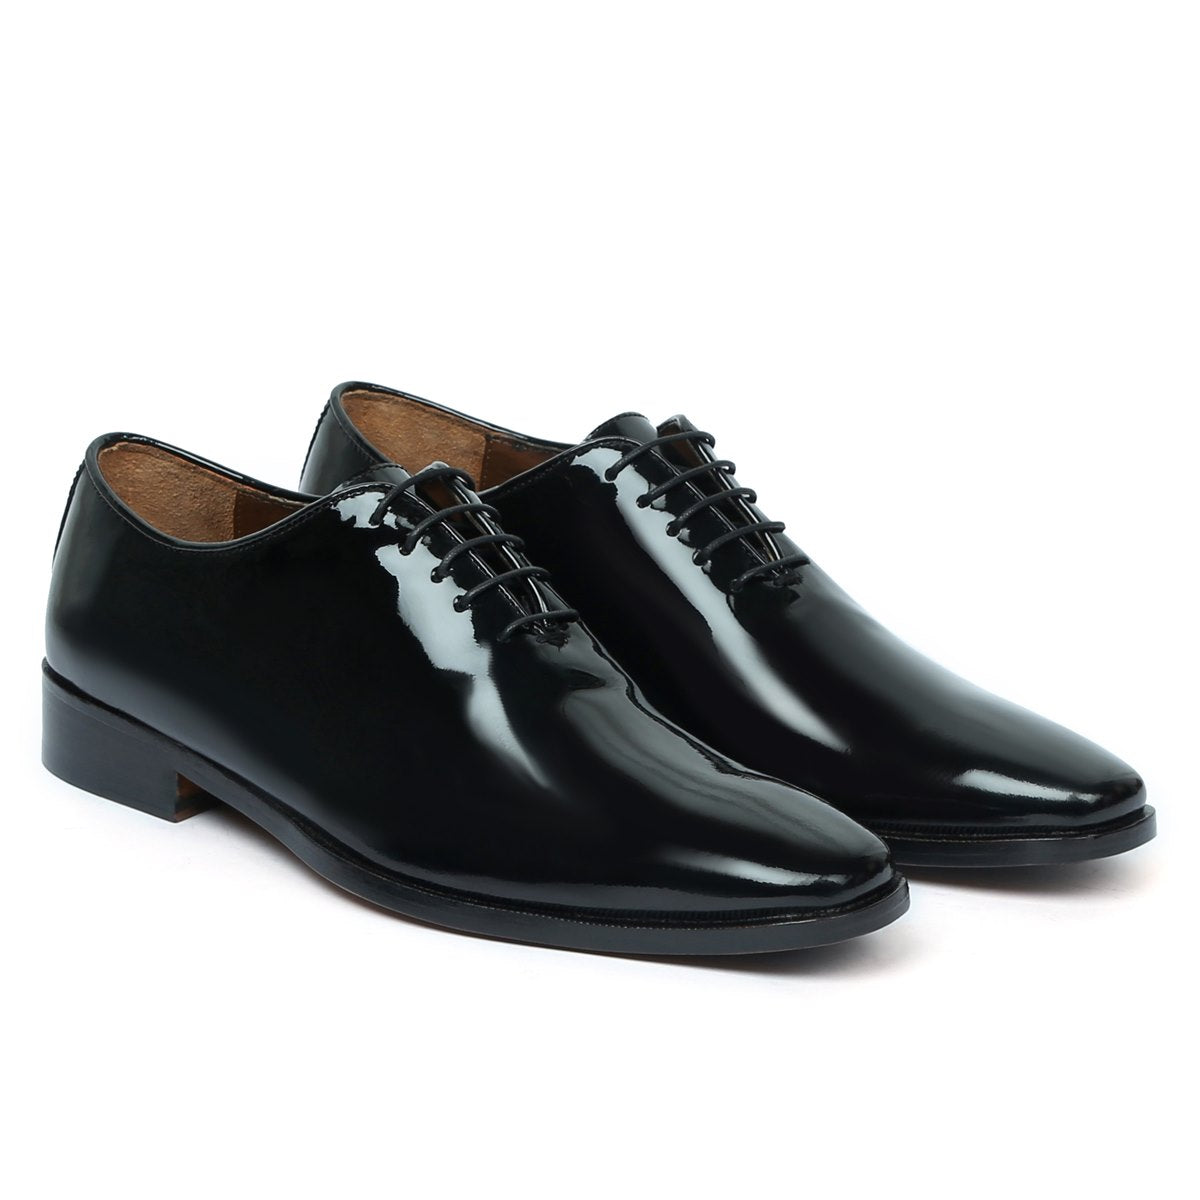 Patent Black Long Tail Hand Painted Leather Handmade Whole Cut/One-Piece Oxford Shoes For Men By Brune & Bareskin